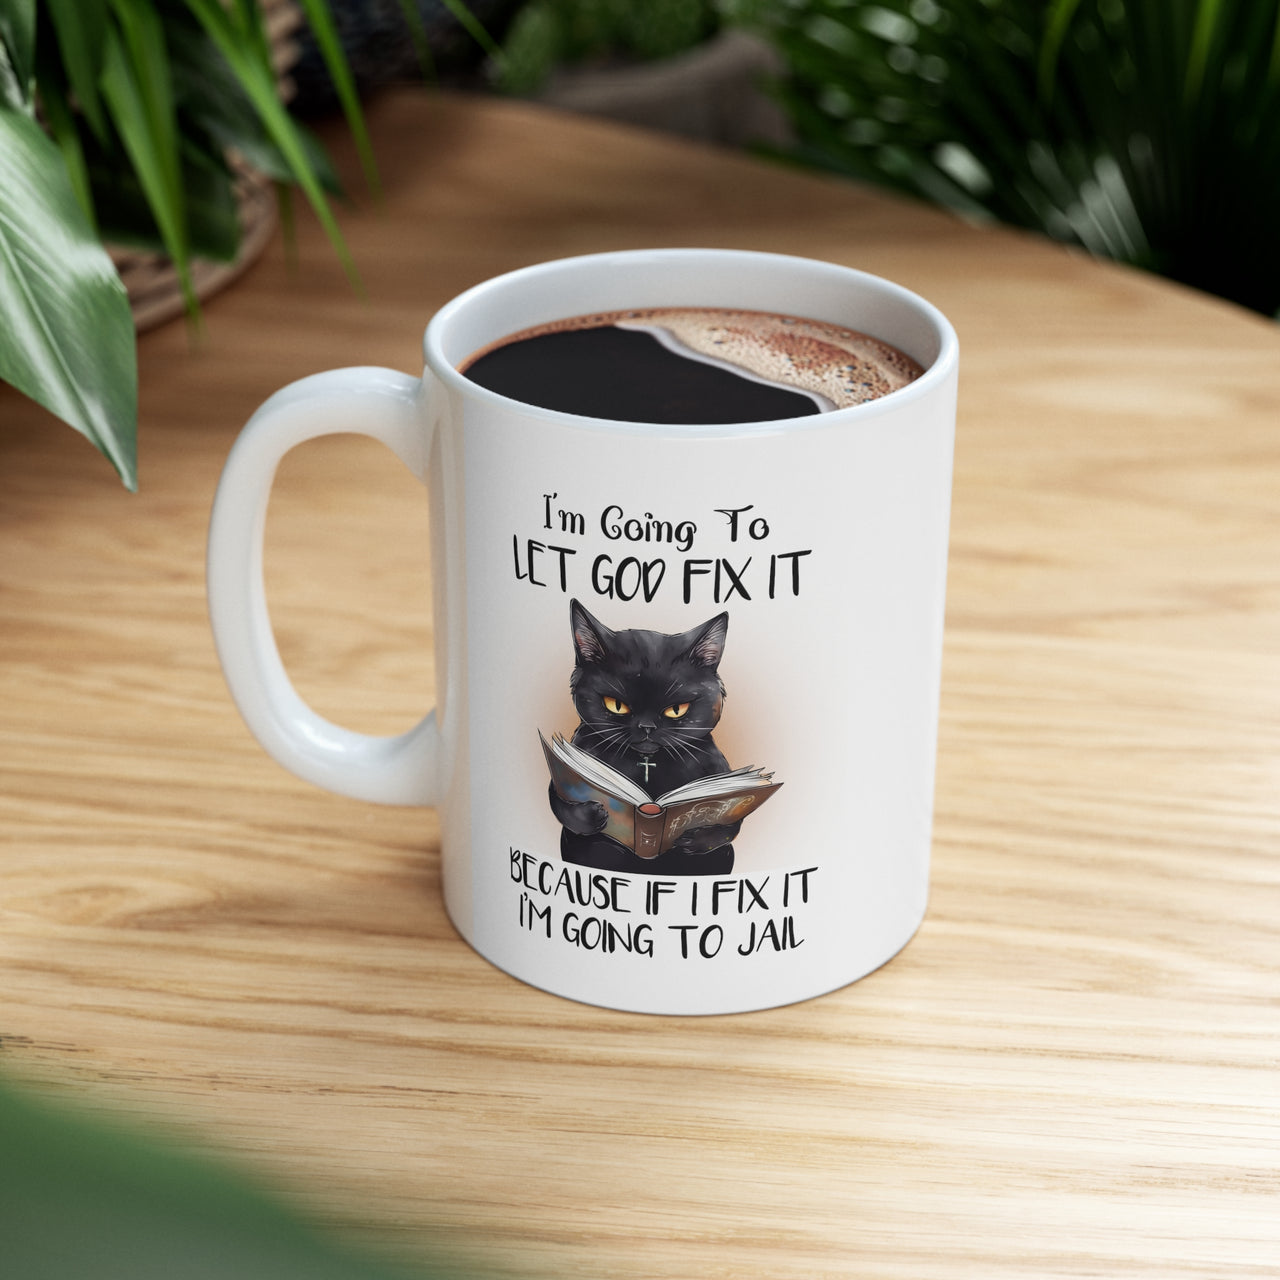 I'm Going To Let God Fix It Because If I Fix It I'm Going To Jail 🐕 🐾 ☕️ Mug